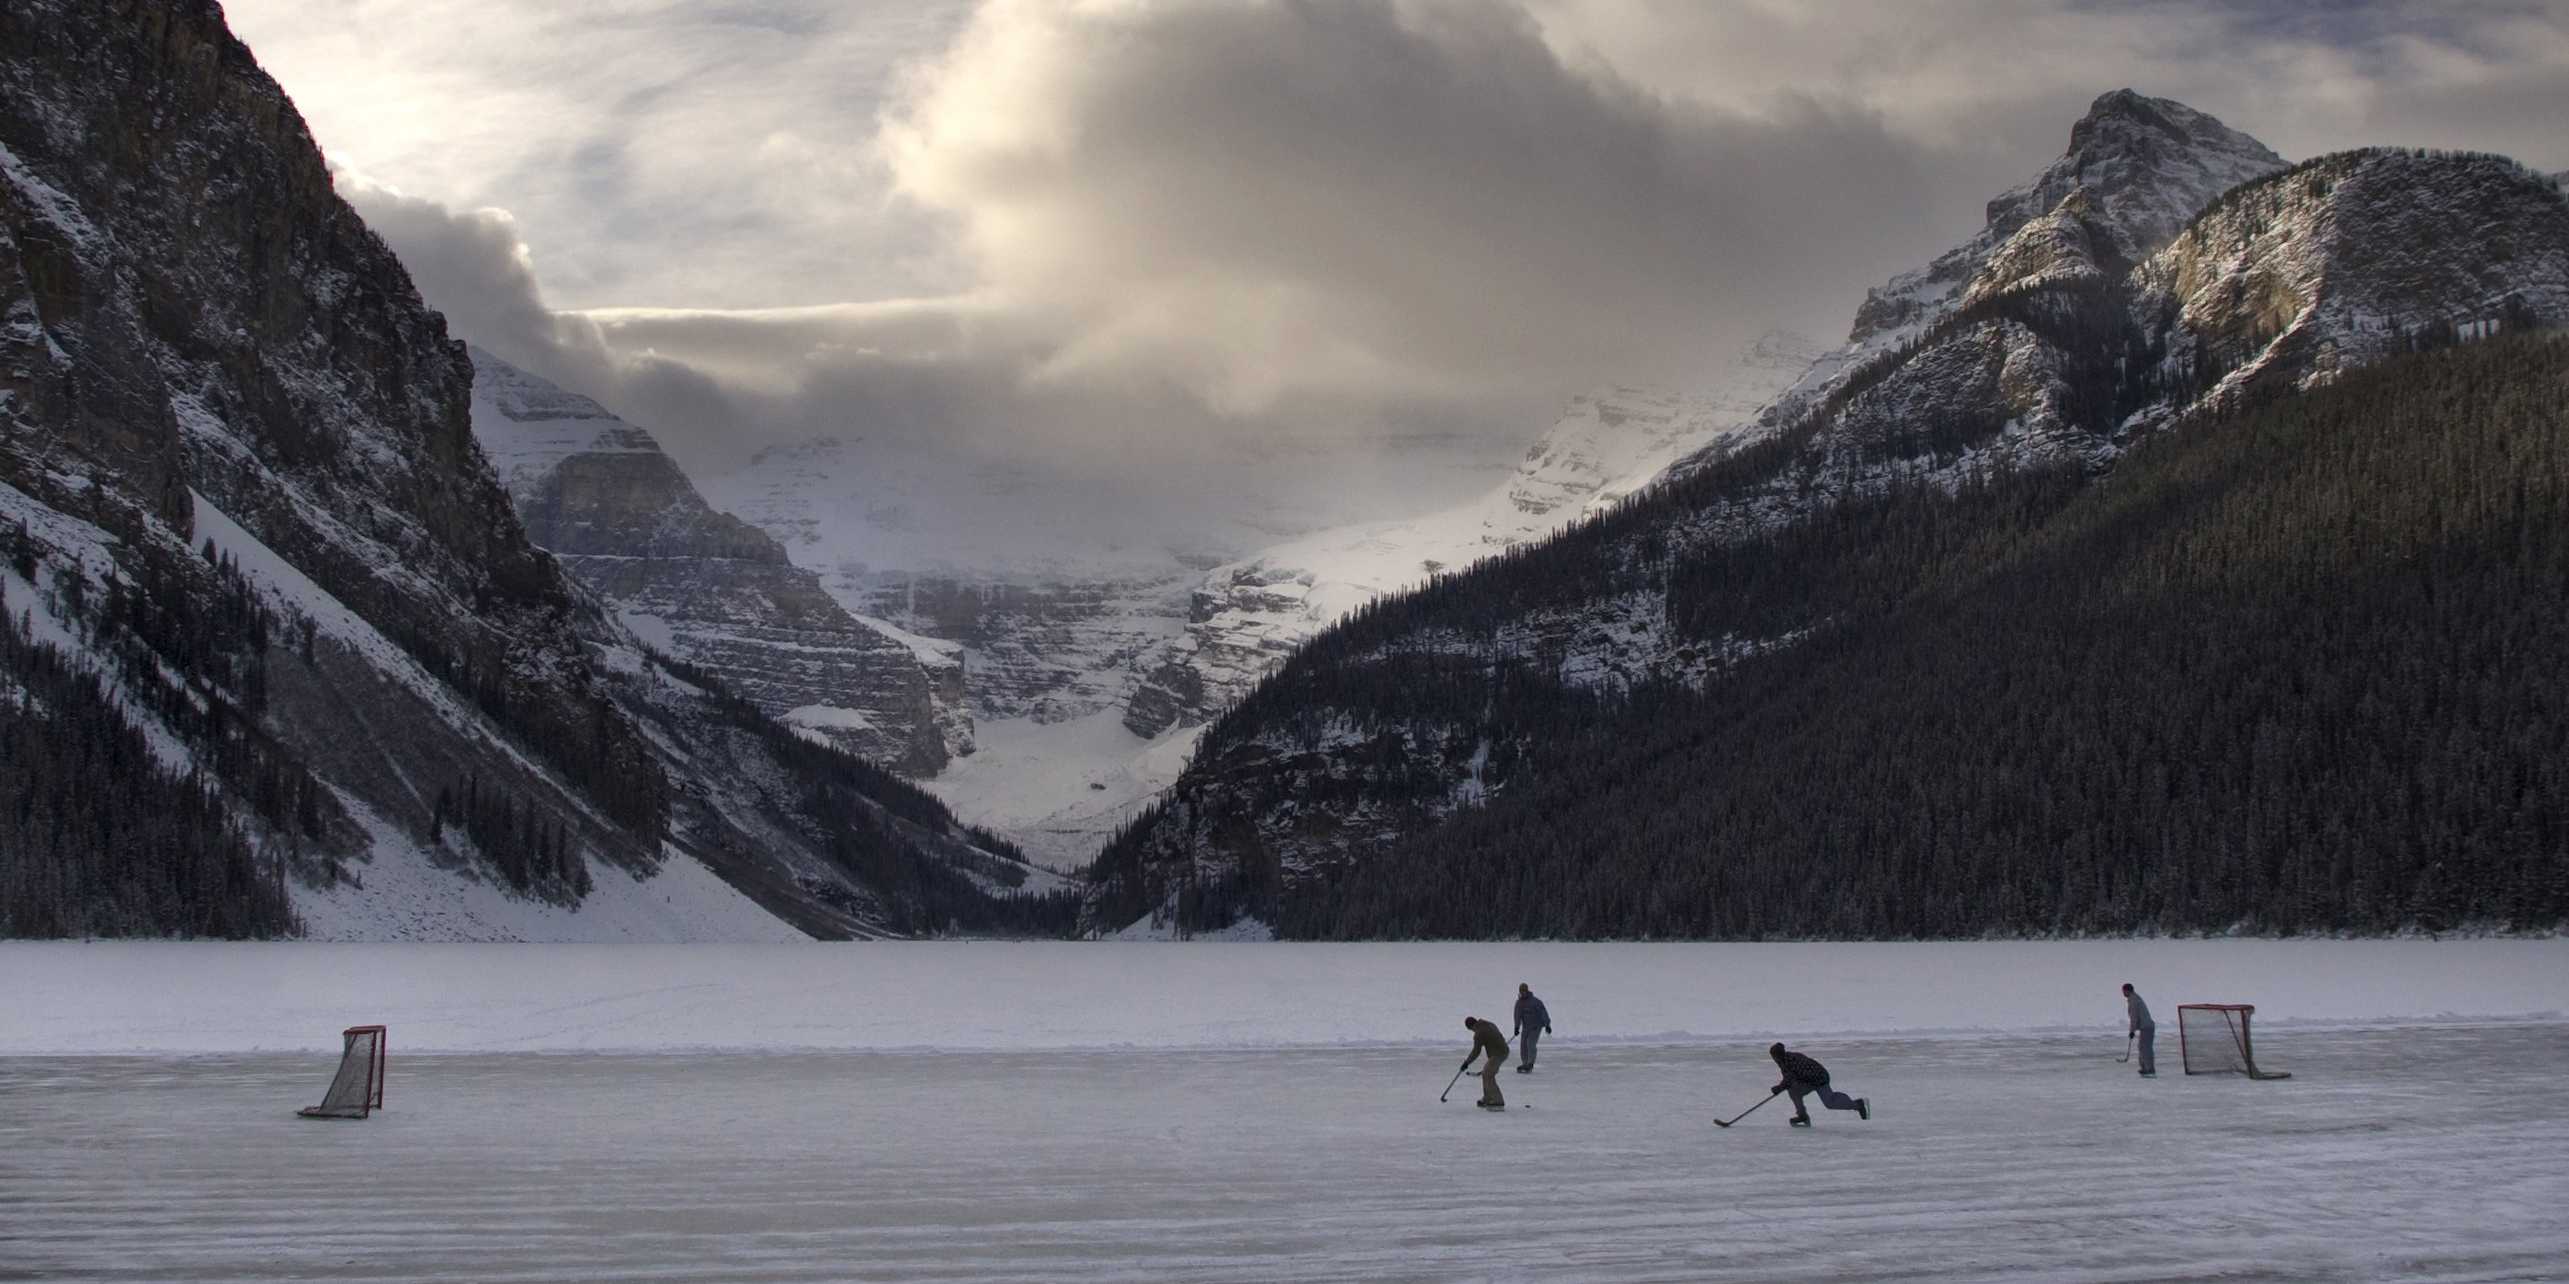 Spectacular Photos Of Pond Hockey Being Played In Zing Weather